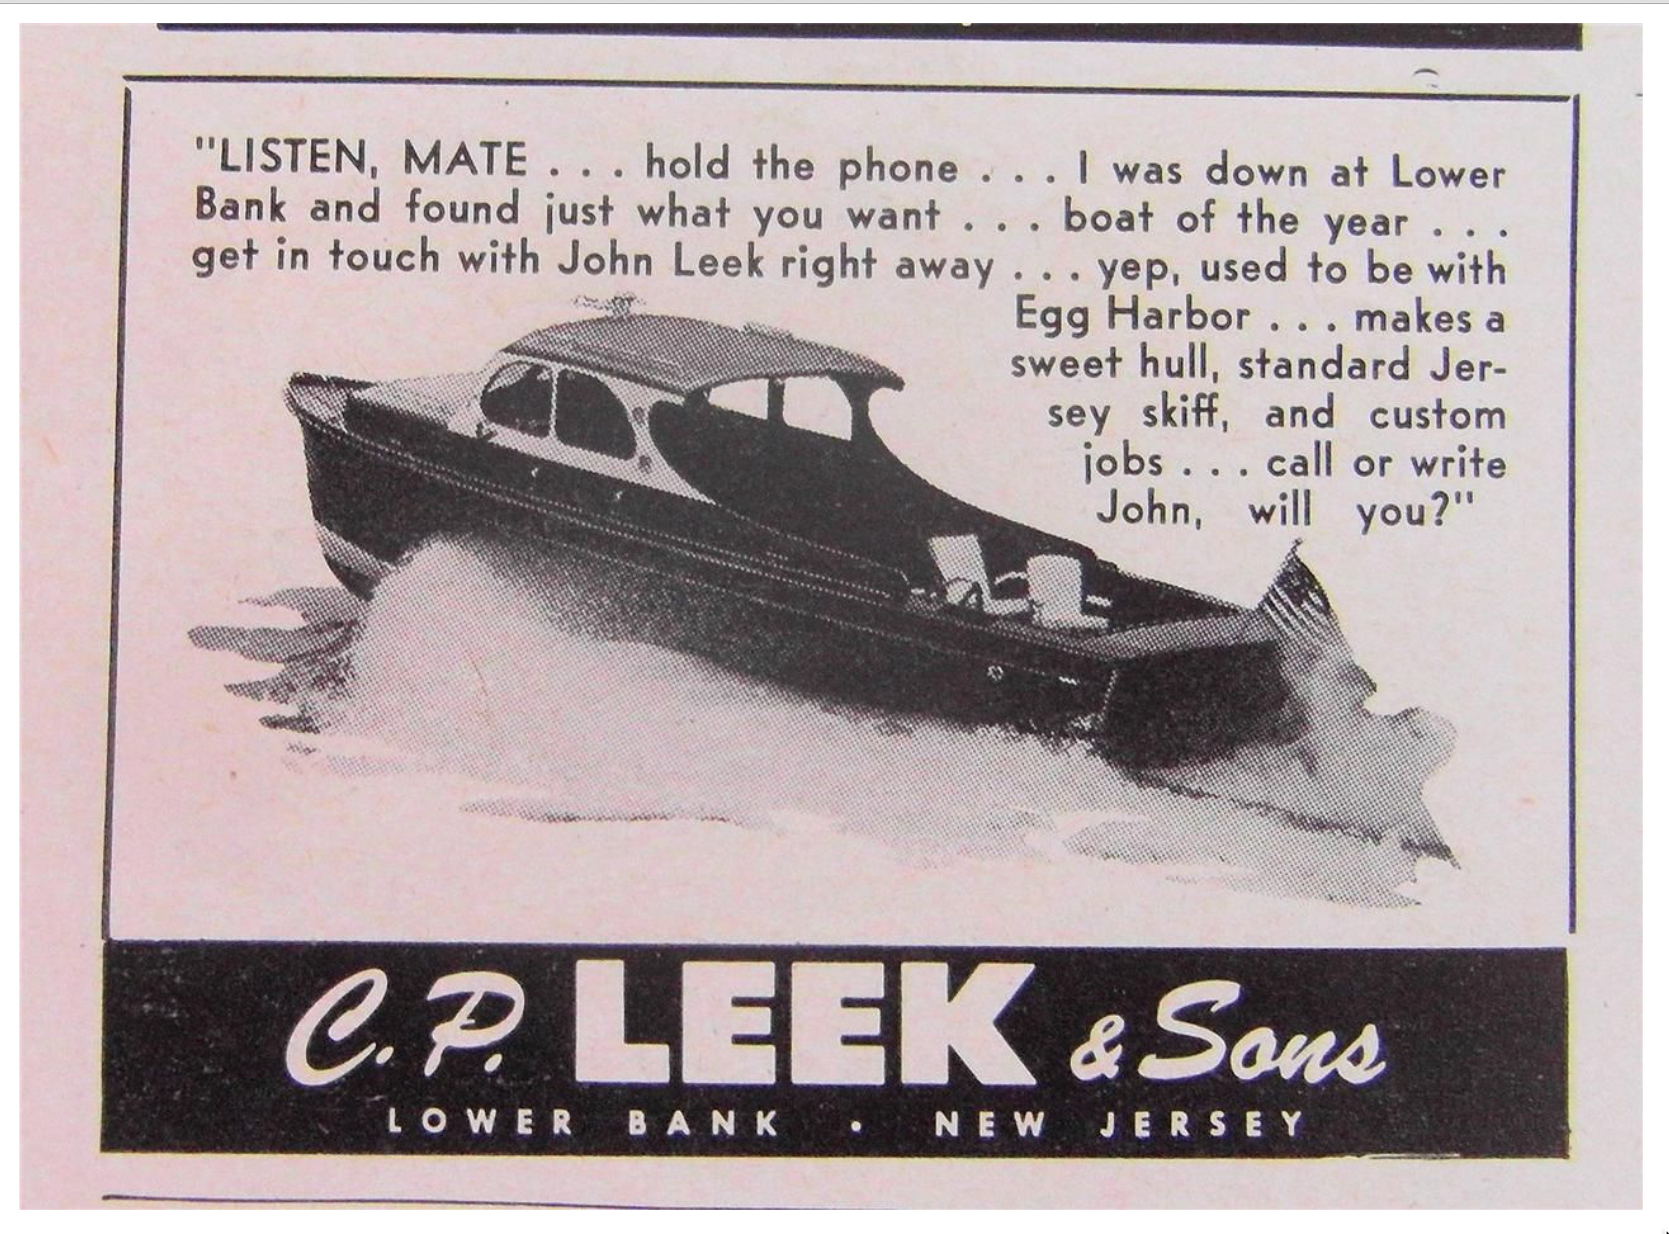 Lower Bank - CP Leek and Sons - Add for Standard Jersey Skiff - 1949